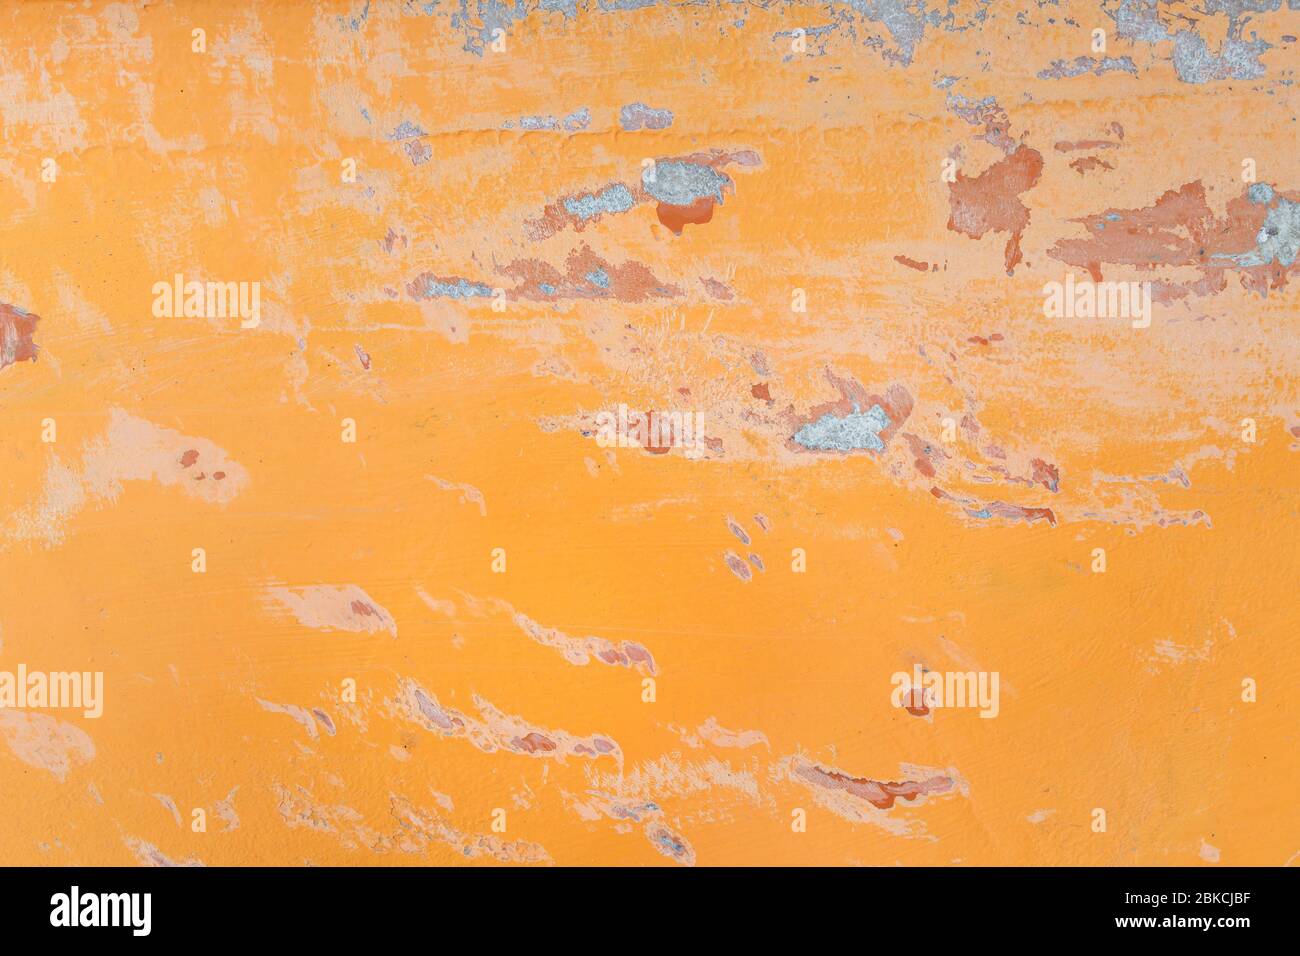 Close-up of an old and weathered orange fiberglass (fibreglass) surface with scratches. High resolution full frame abstract background. Copy space. Stock Photo